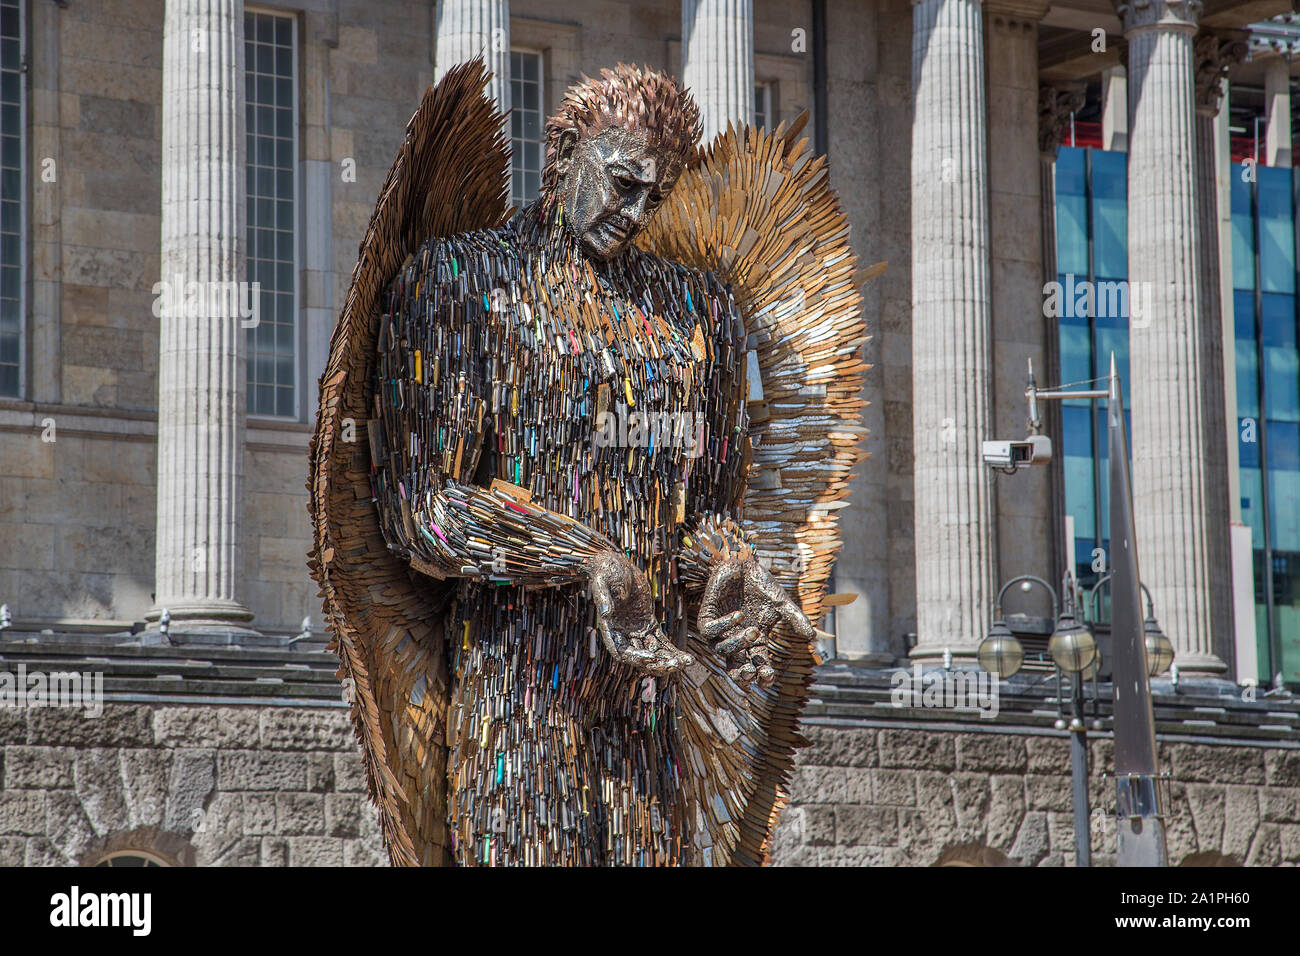 The Knife Angel in Victoria Square. Representing Birmingham's determination to address knife crime and cement its reputation as a city of peace. Stock Photo